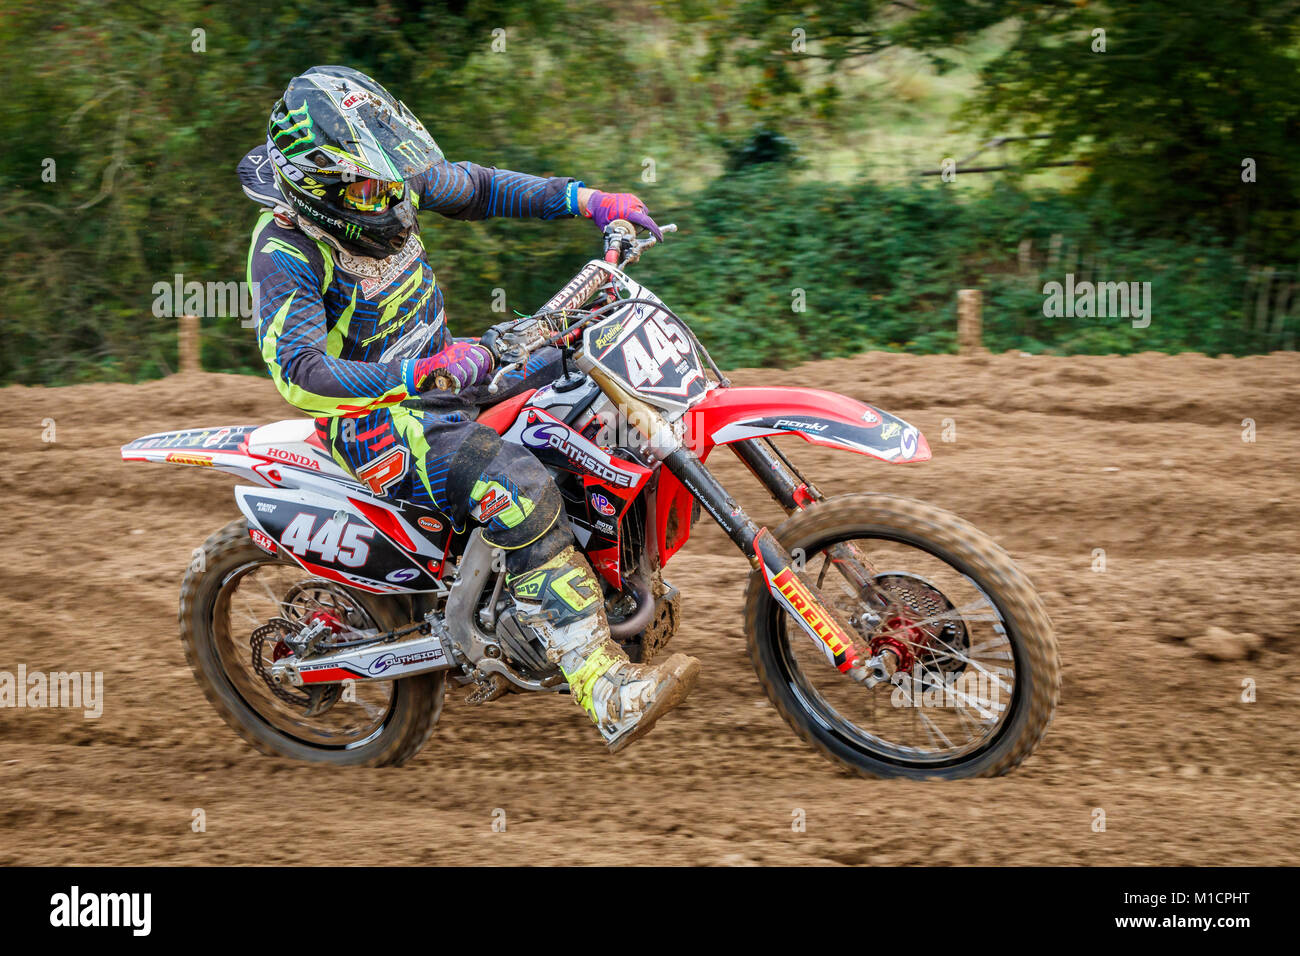 Andrew Smith on the Southside MX / AMS Services Honda 450 at the NGR & ACU Eastern EVO Motocross Championships, Cadders Hill, Lyng, Norfolk, UK. Stock Photo